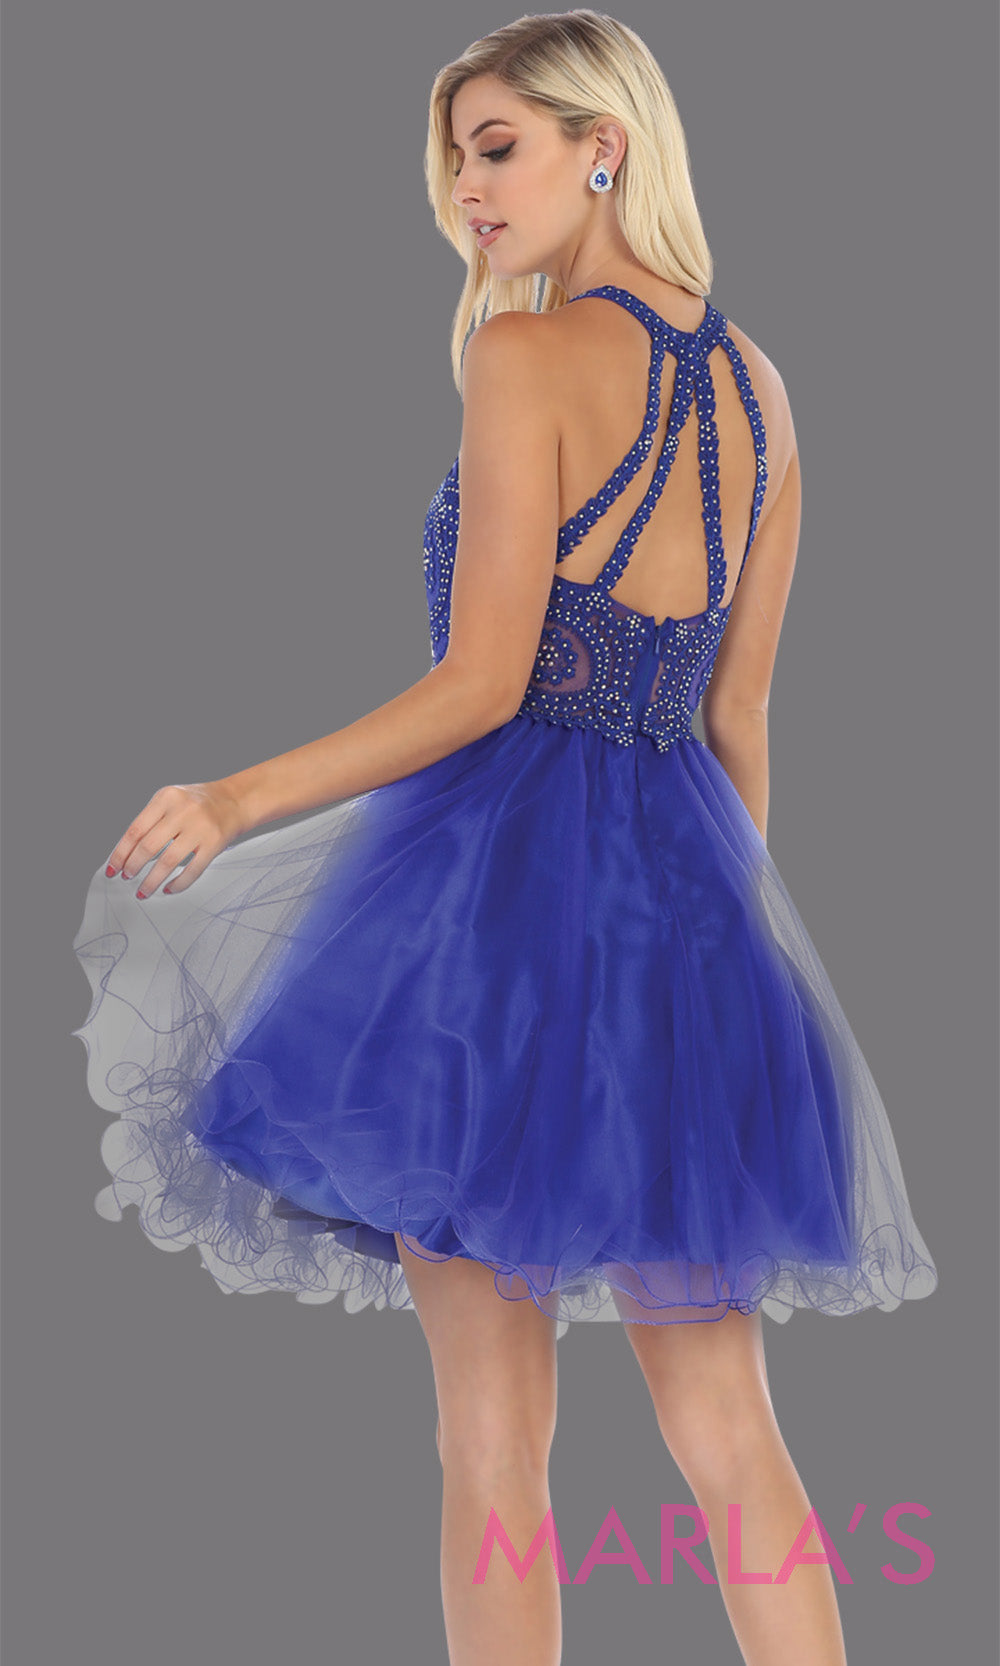 Back of Short high neck royal blue grade 8 graduation dress with puffy skirt from mayqueen.This blue high neck ballerina dress is perfect for grade 8 grad, homecoming,Bat Mitzvah,quinceanera damas,middle school graduation,plus size,junior bridesmaidsgrade 8 grad dresses, graduation dresses